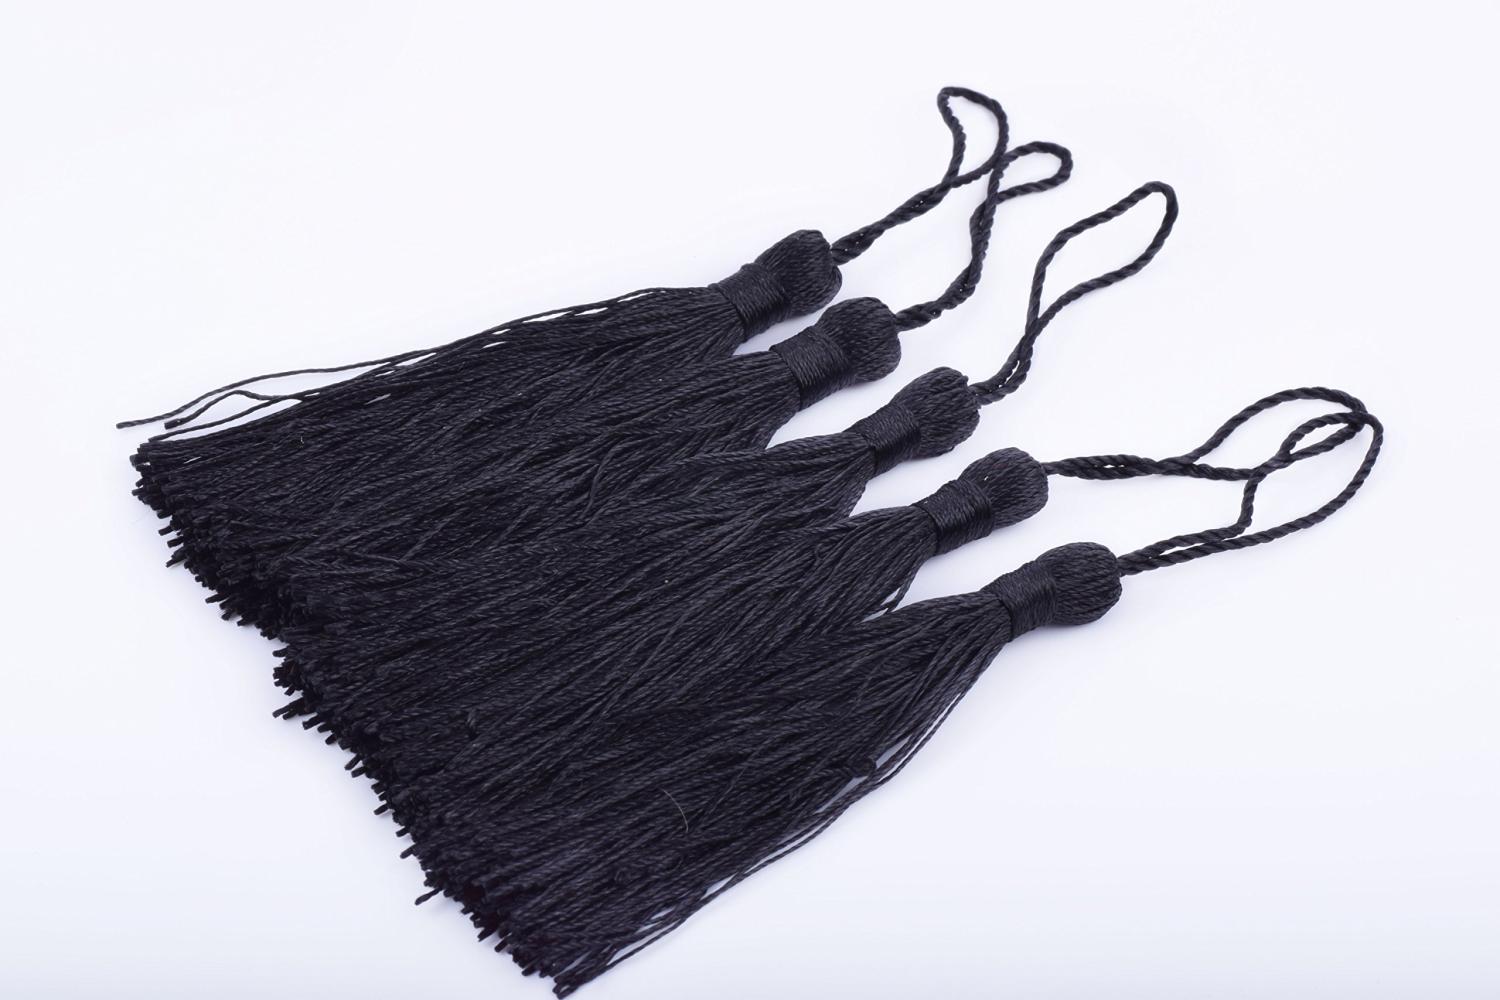 KONMAY Bulk 20pcs Tri-Layered Tassels with Hanging Loop for Jewelry Making, Clothing